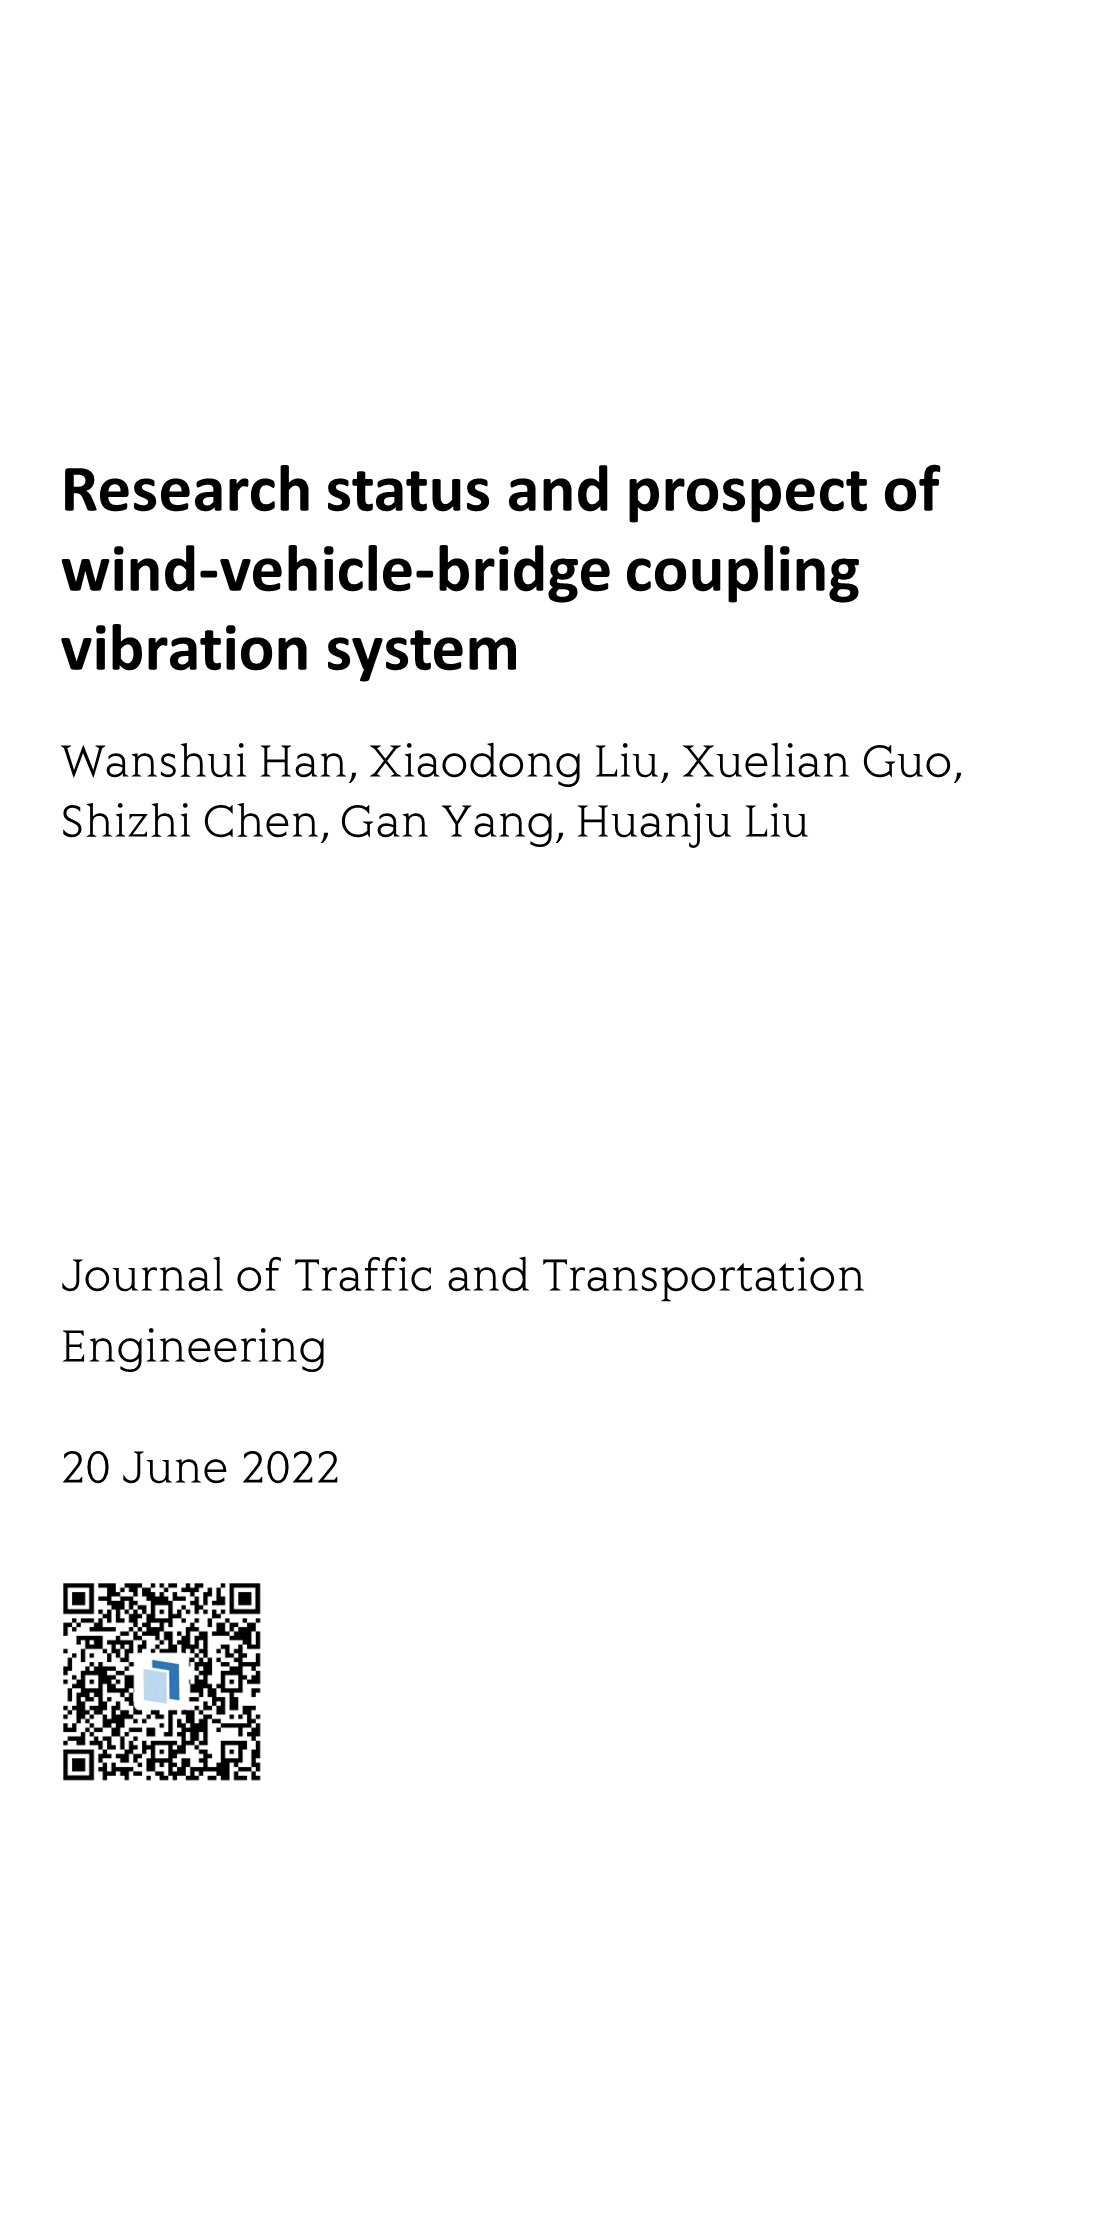 Research status and prospect of wind-vehicle-bridge coupling vibration system_1